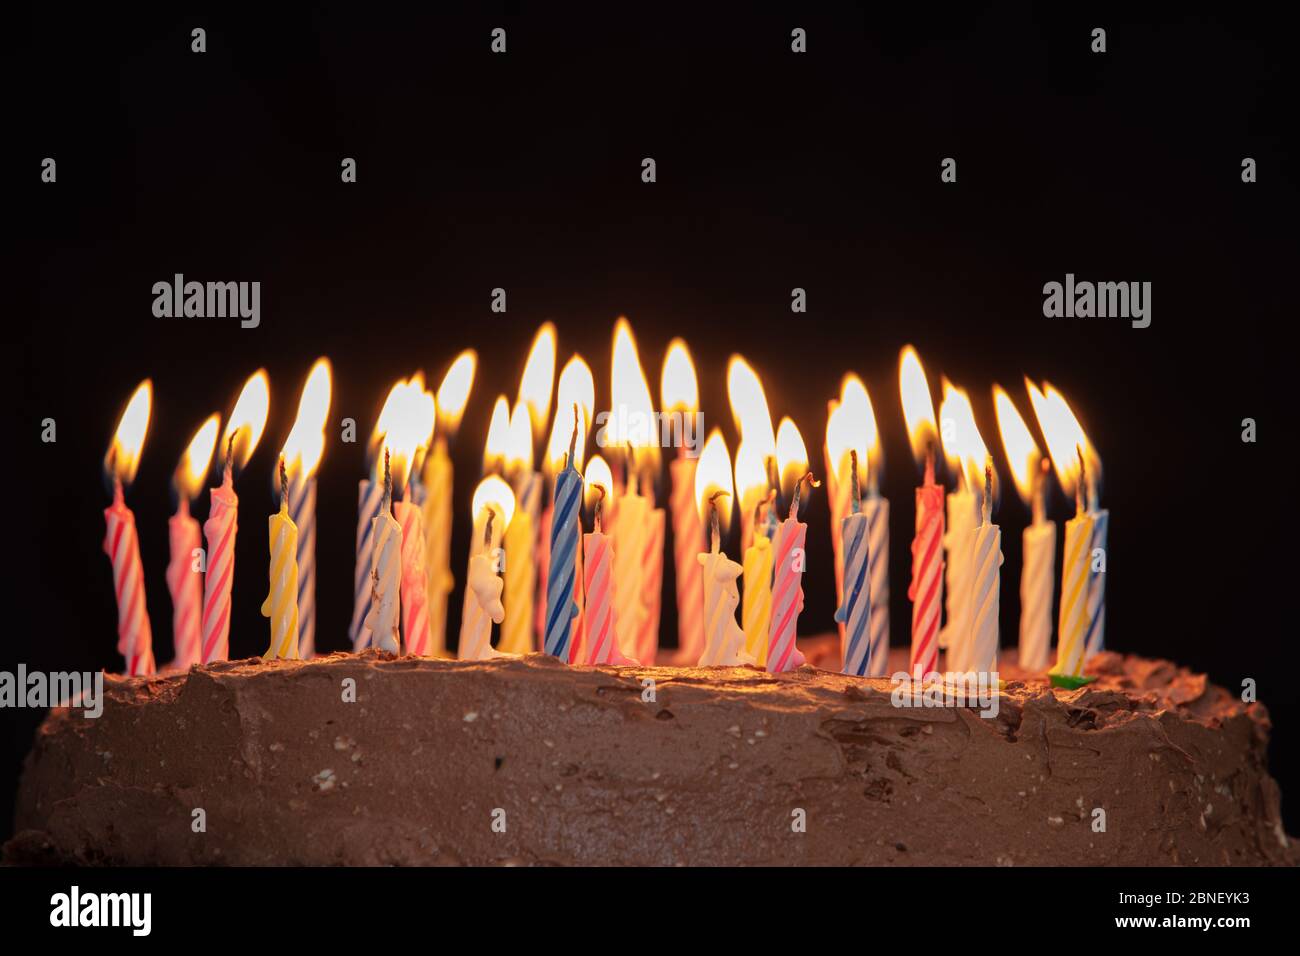 Closeup shot of a birthday cake with lighted colourful candles on a black  background Stock Photo - Alamy